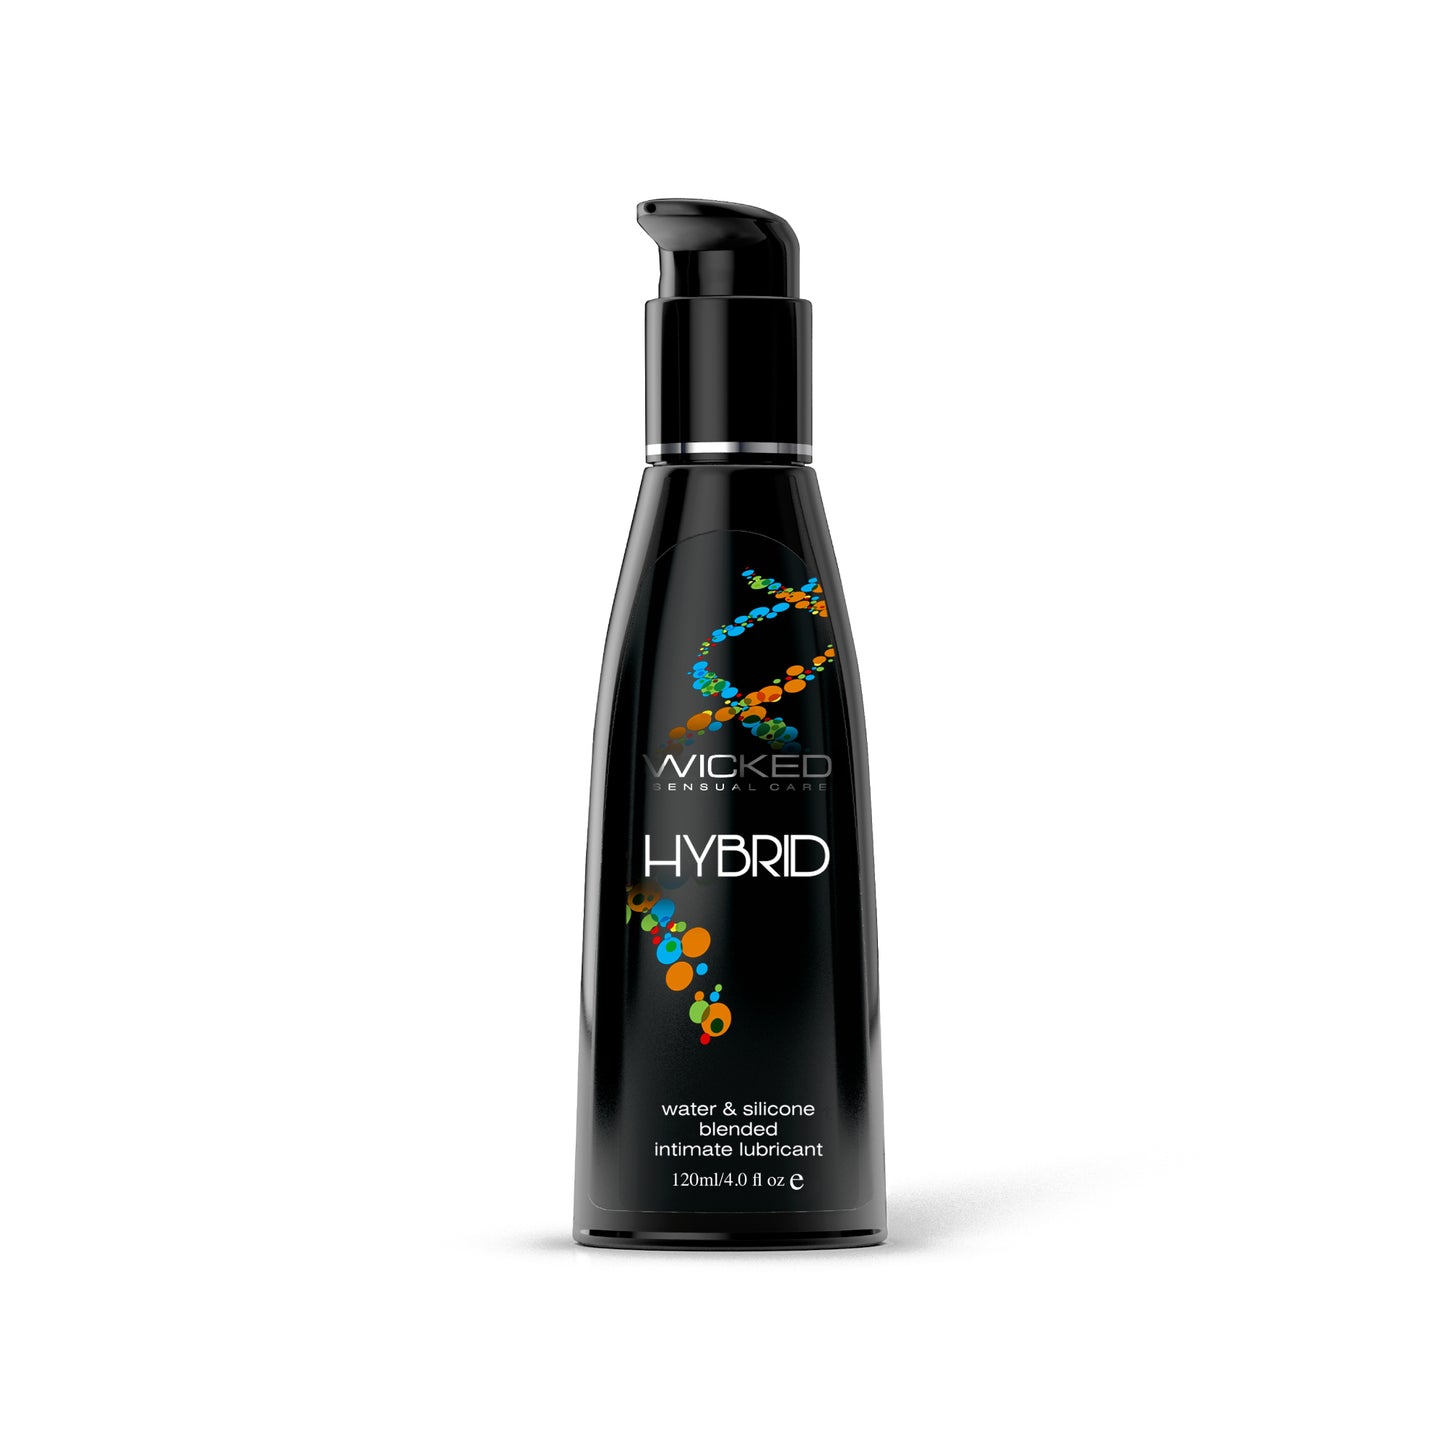 Wicked - Water And Silicone Blended Intimate Lubricant | Hybrid